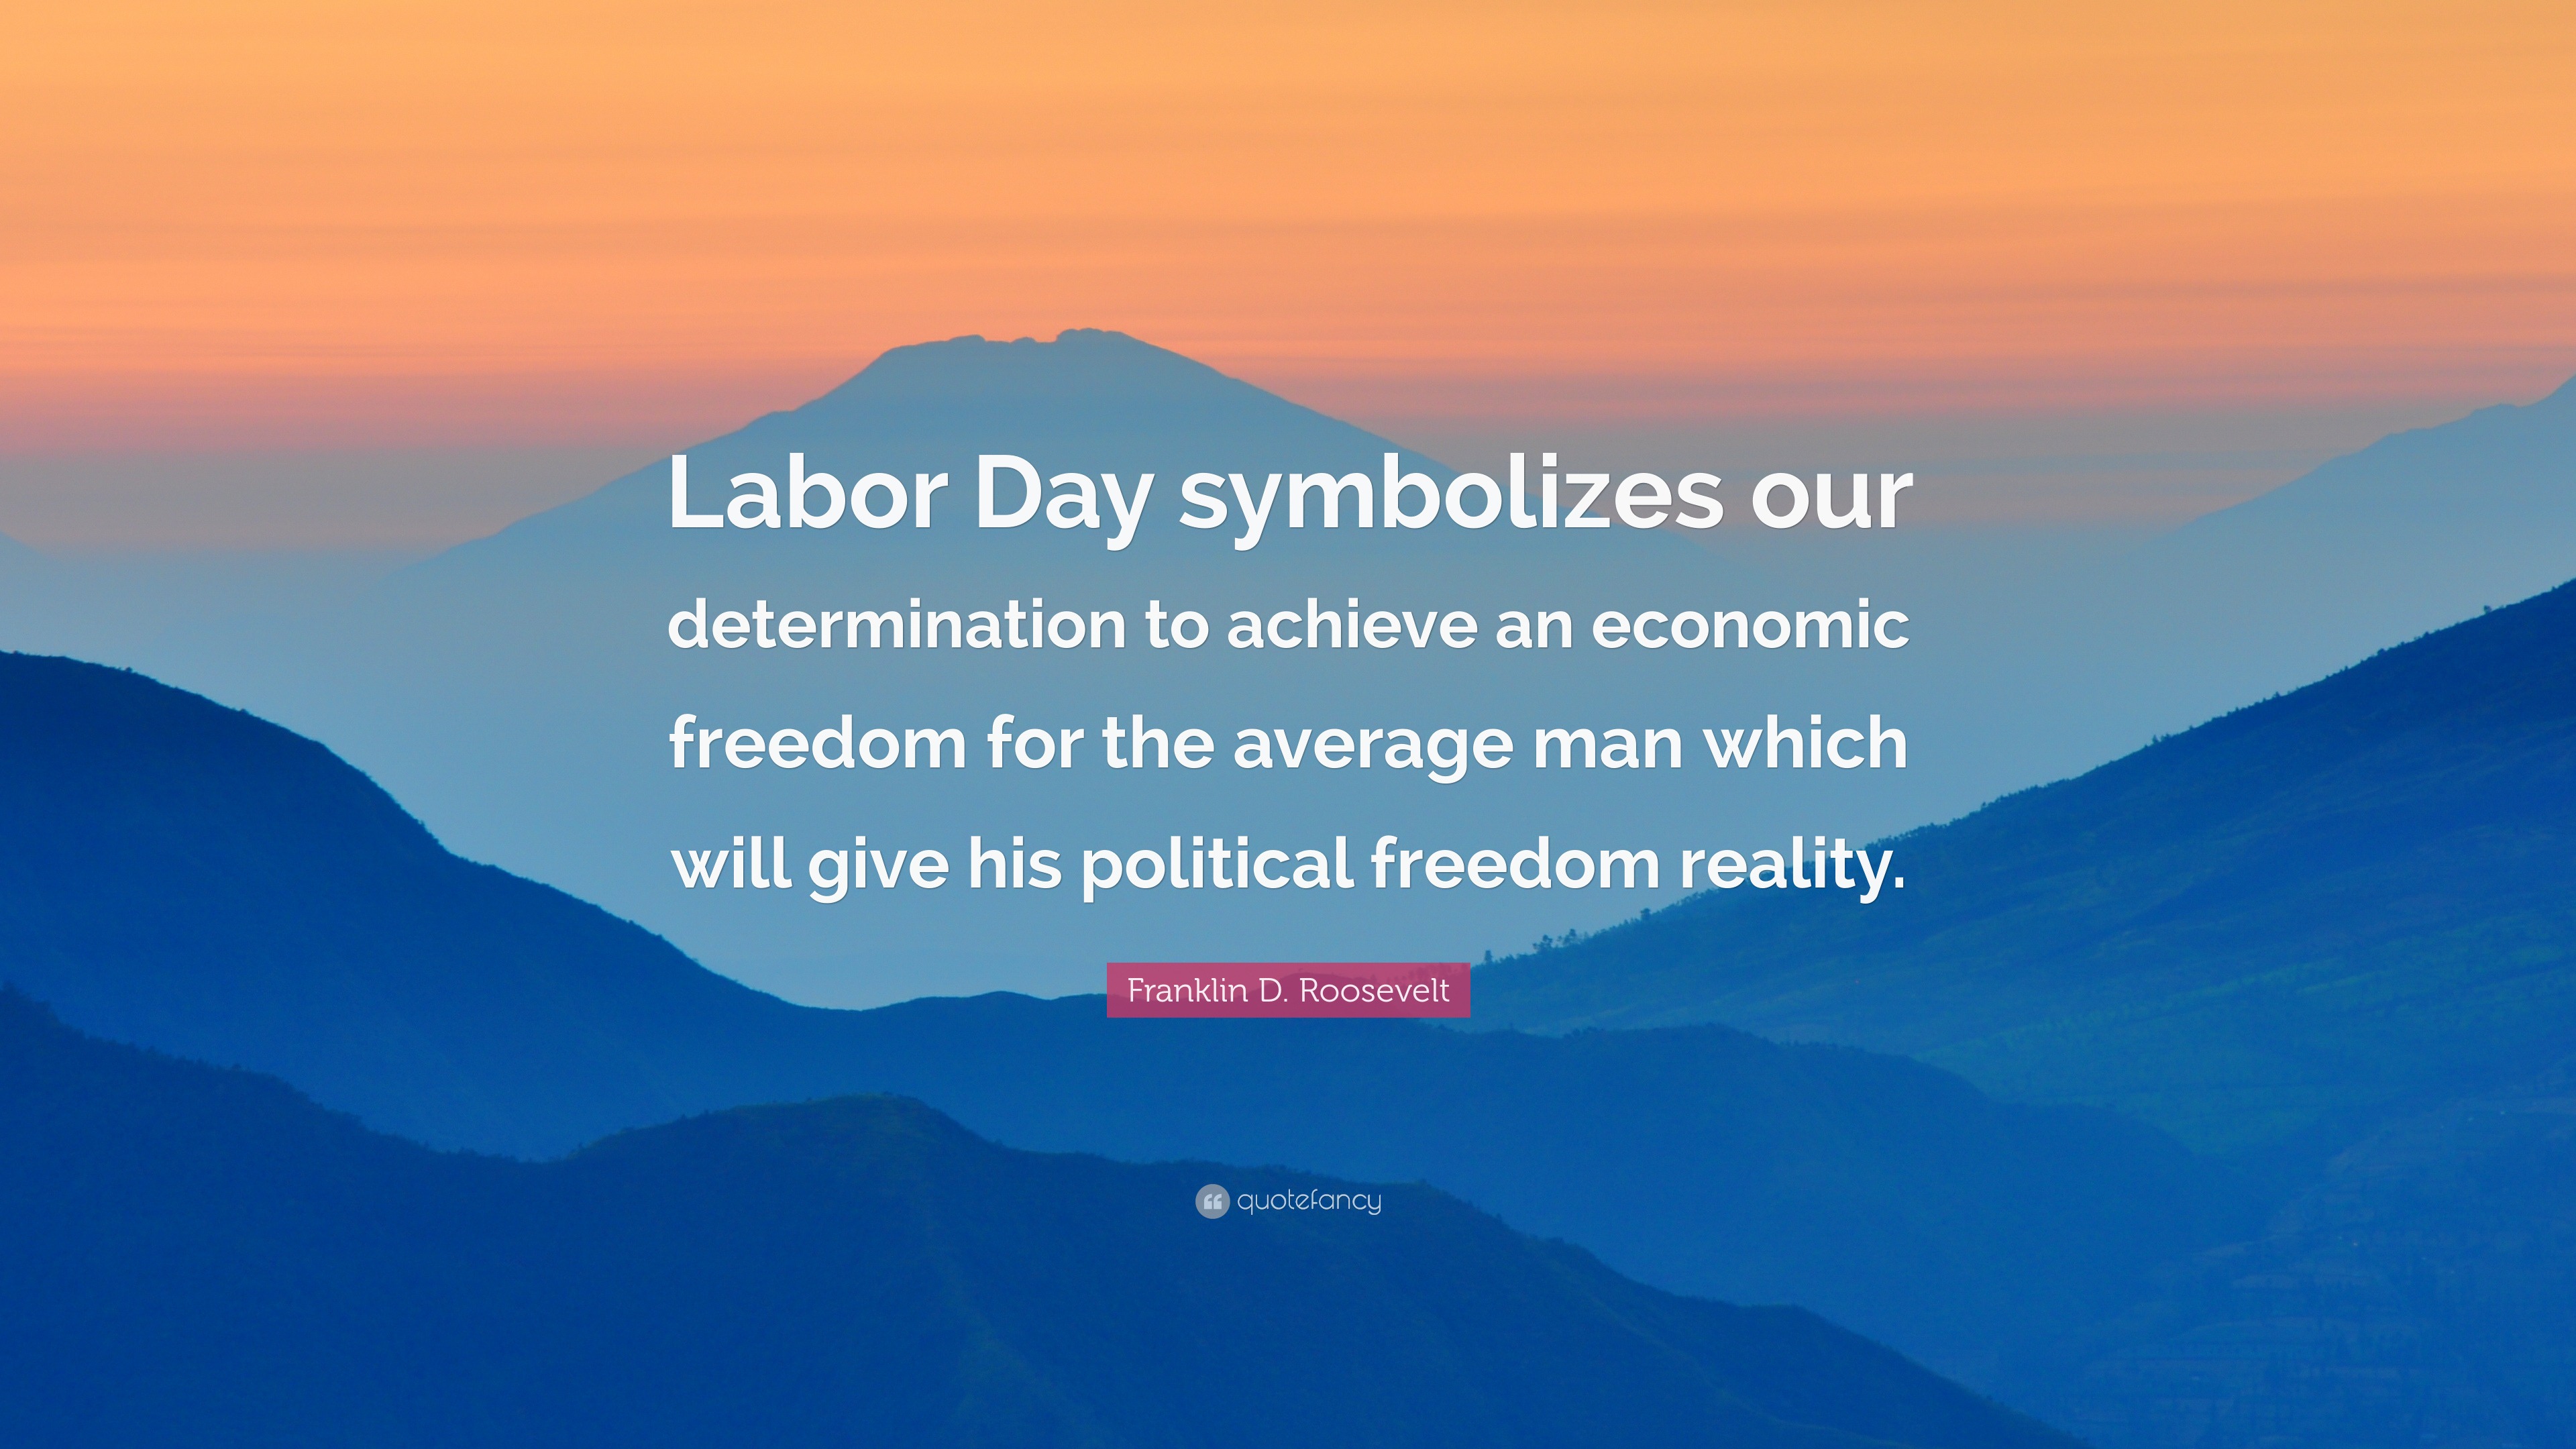 Franklin D. Roosevelt Quote “Labor Day symbolizes our